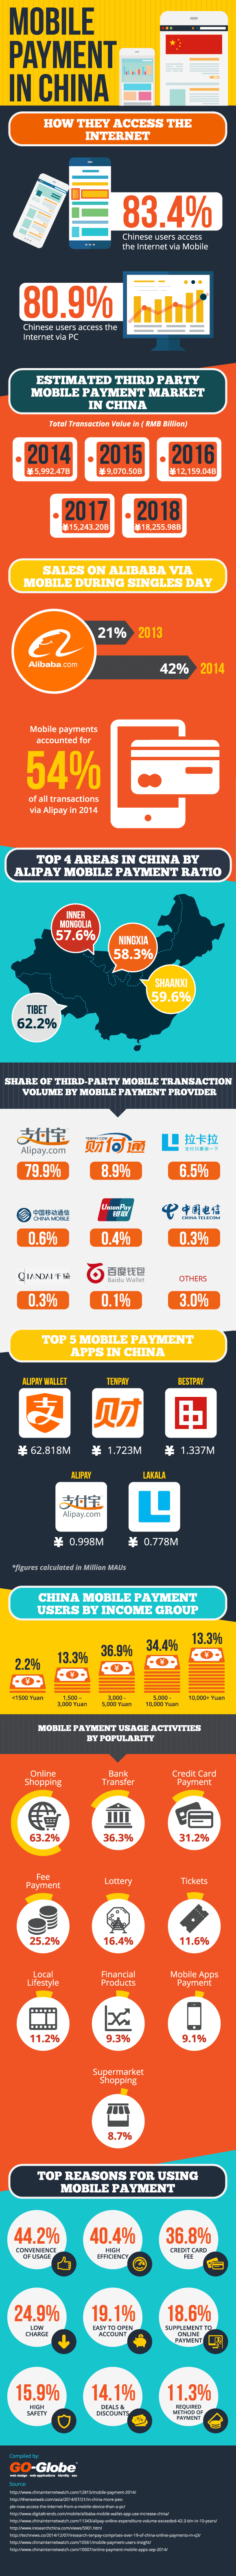 Mobile Payments in China